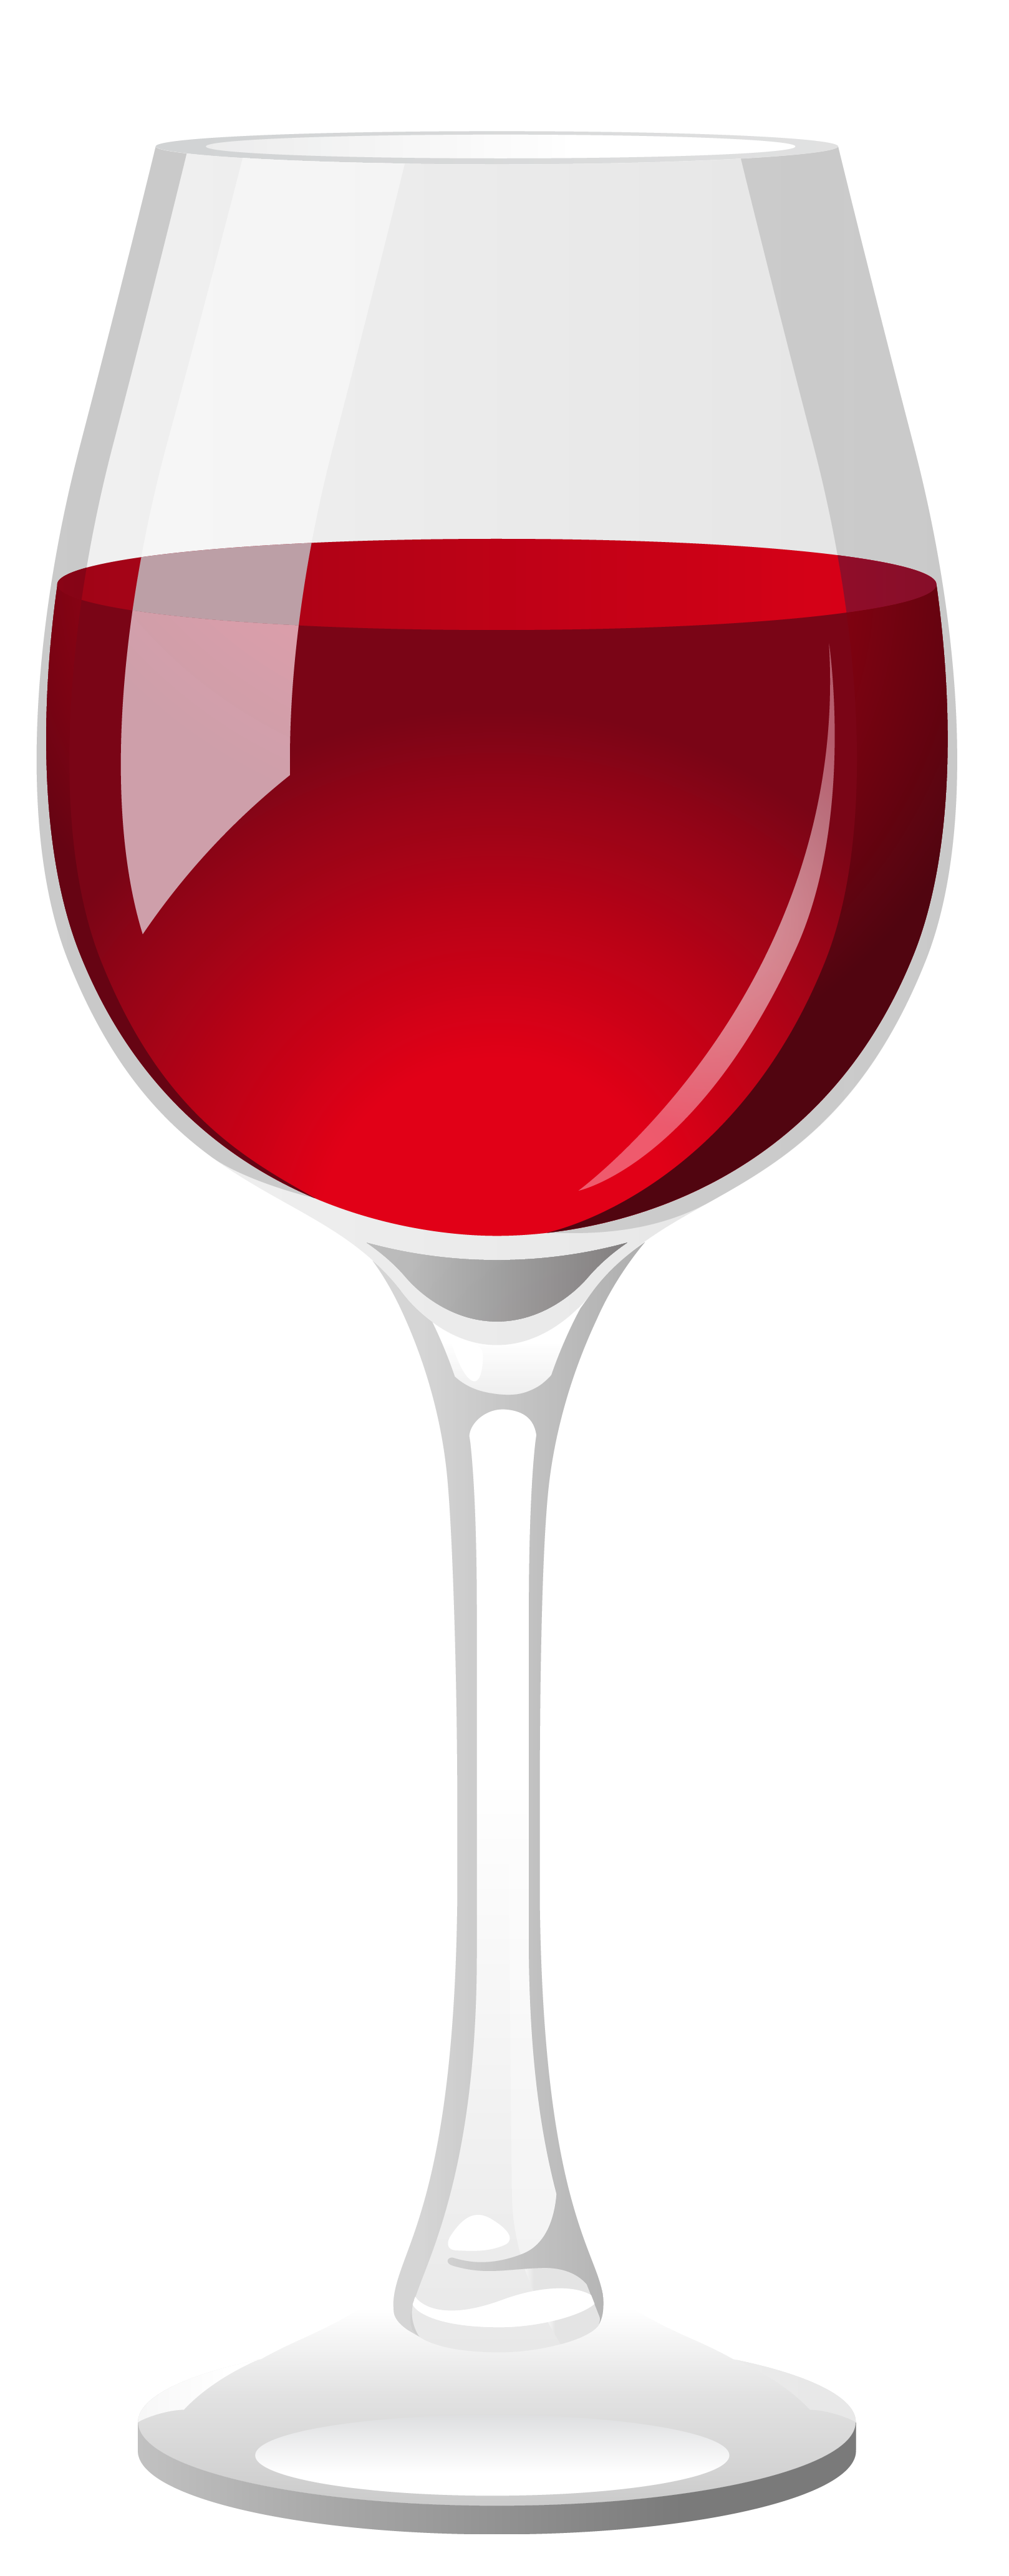 clipart glass of wine - photo #20